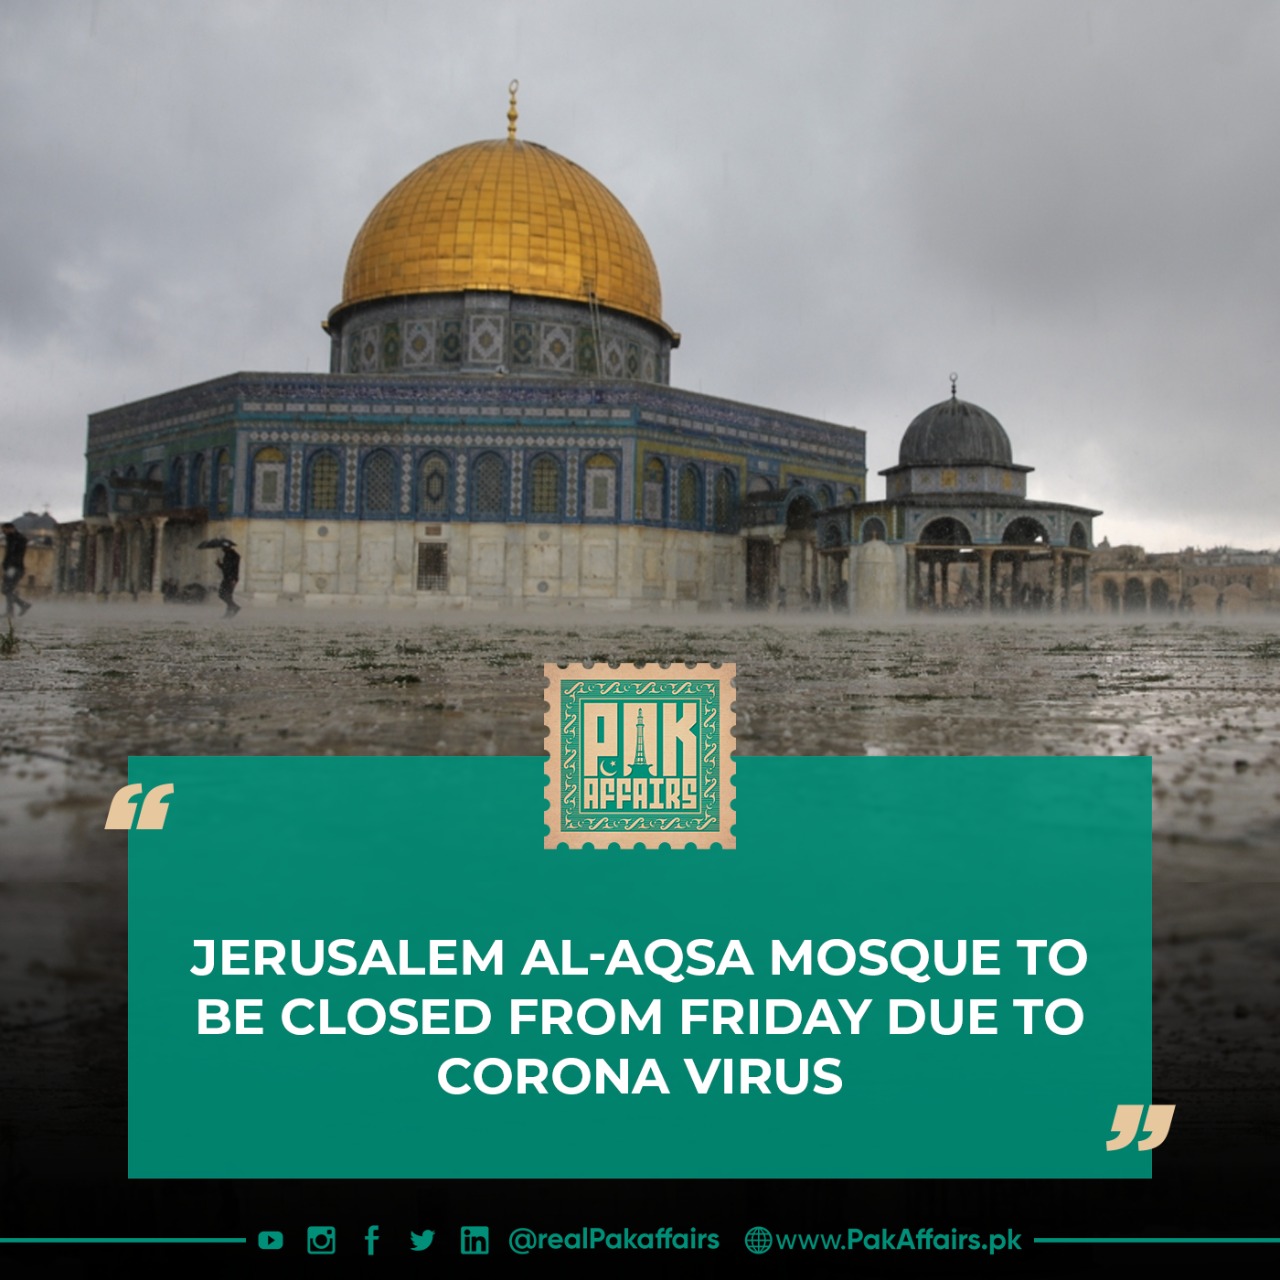 Jerusalem Al-Aqsa mosque to be closed from Friday due to Coronavirus